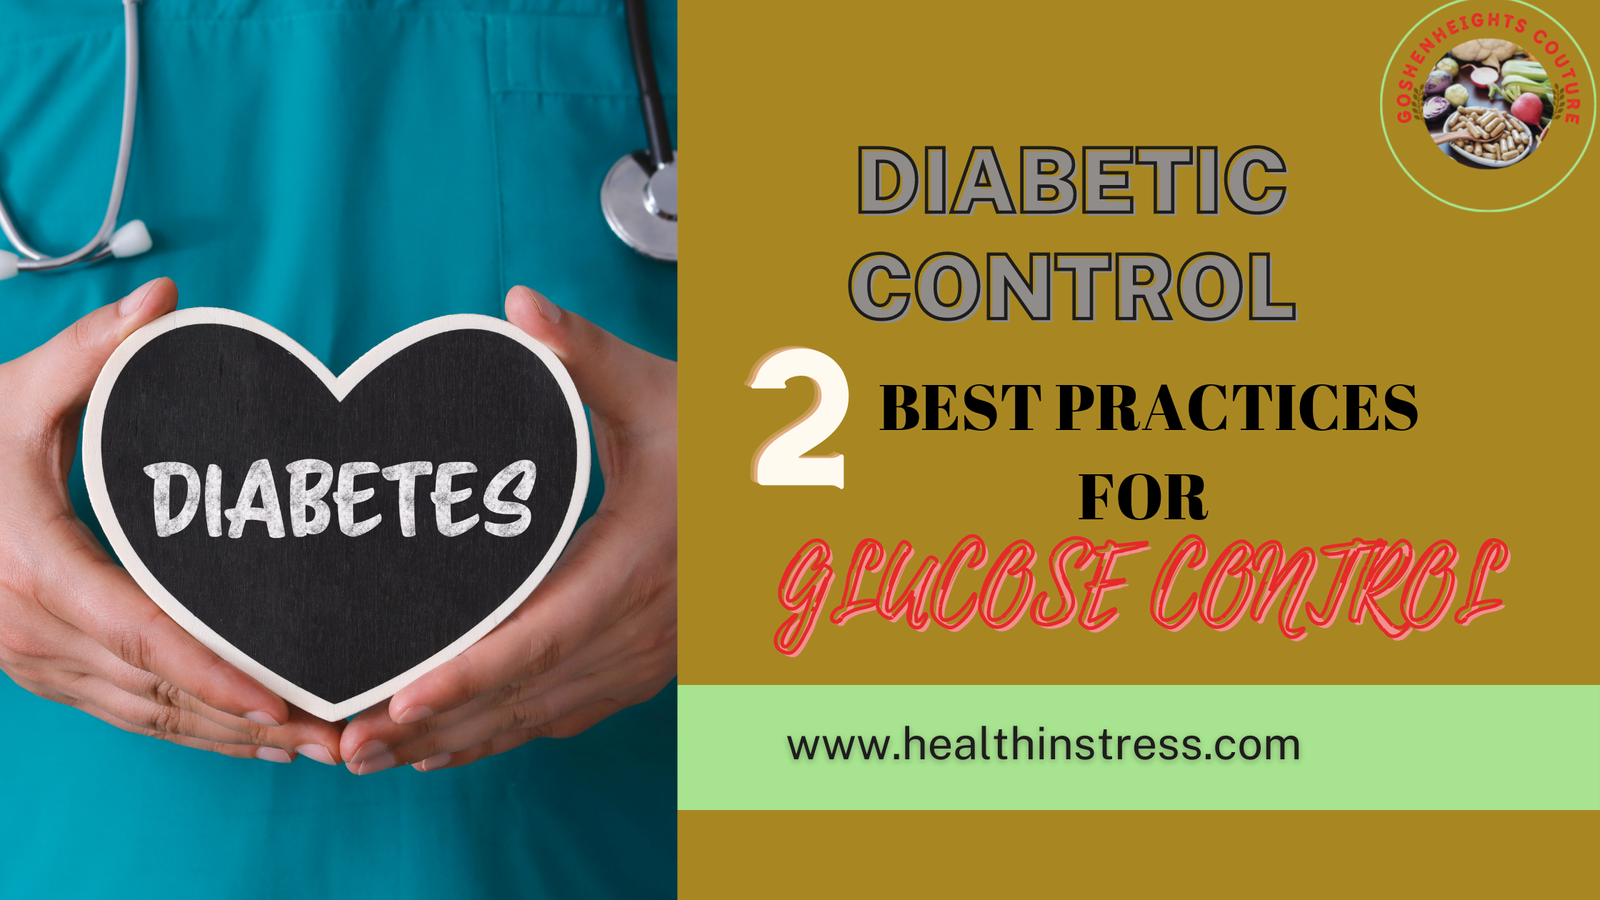 You are currently viewing DIABETIC CONTROL .2 Best Practices For Glucose Control